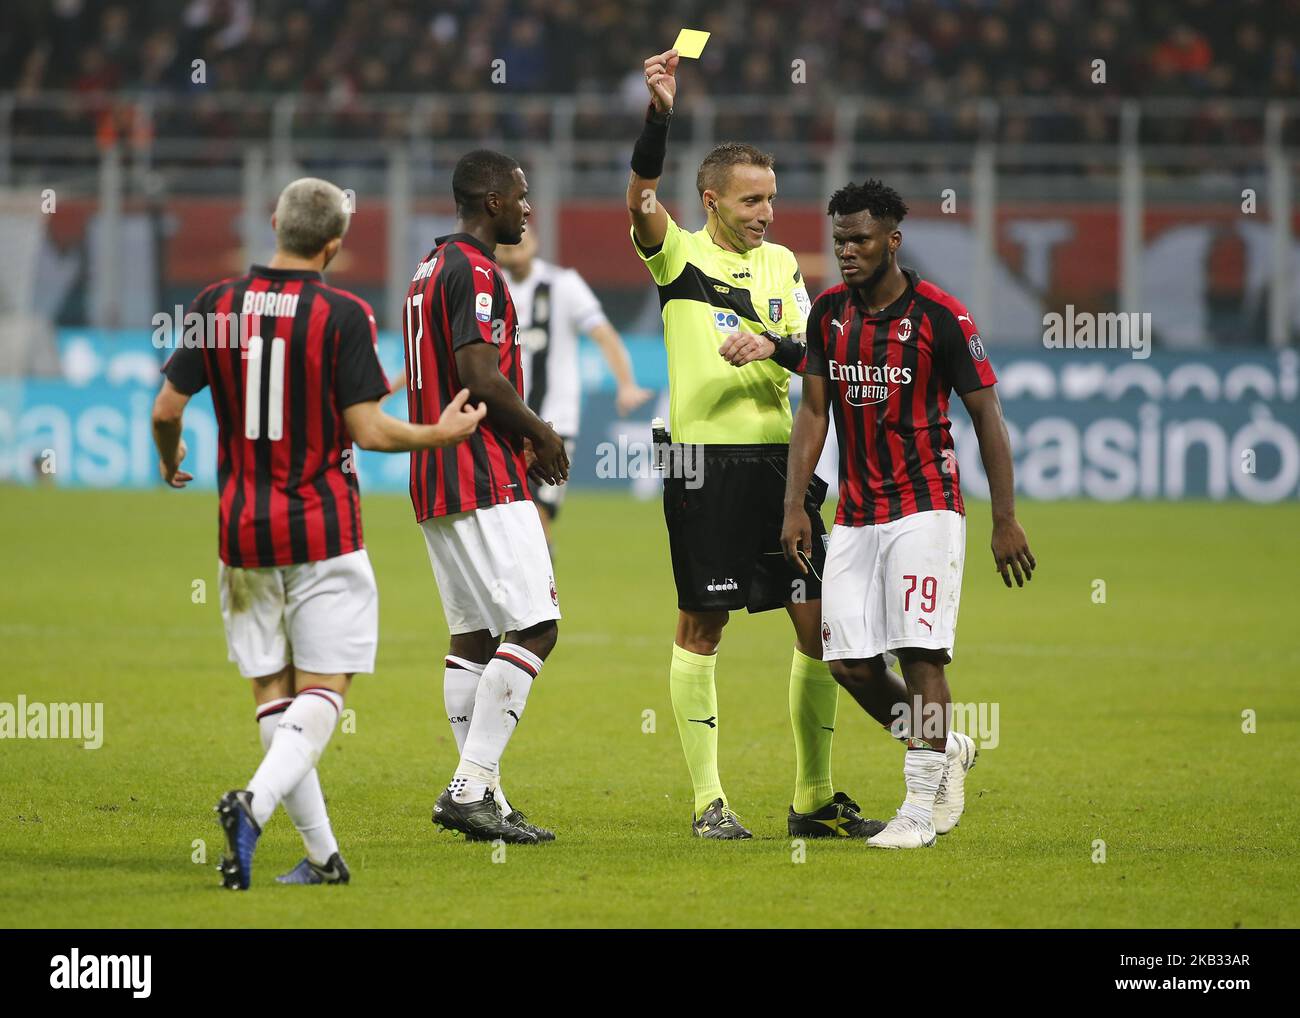 Referee Paolo Mazzoleni gives a red card to Gonzalo Higuain (not in picture) of AC Milan during the Italian Serie A match between AC Milan v Juventus at the San Siro